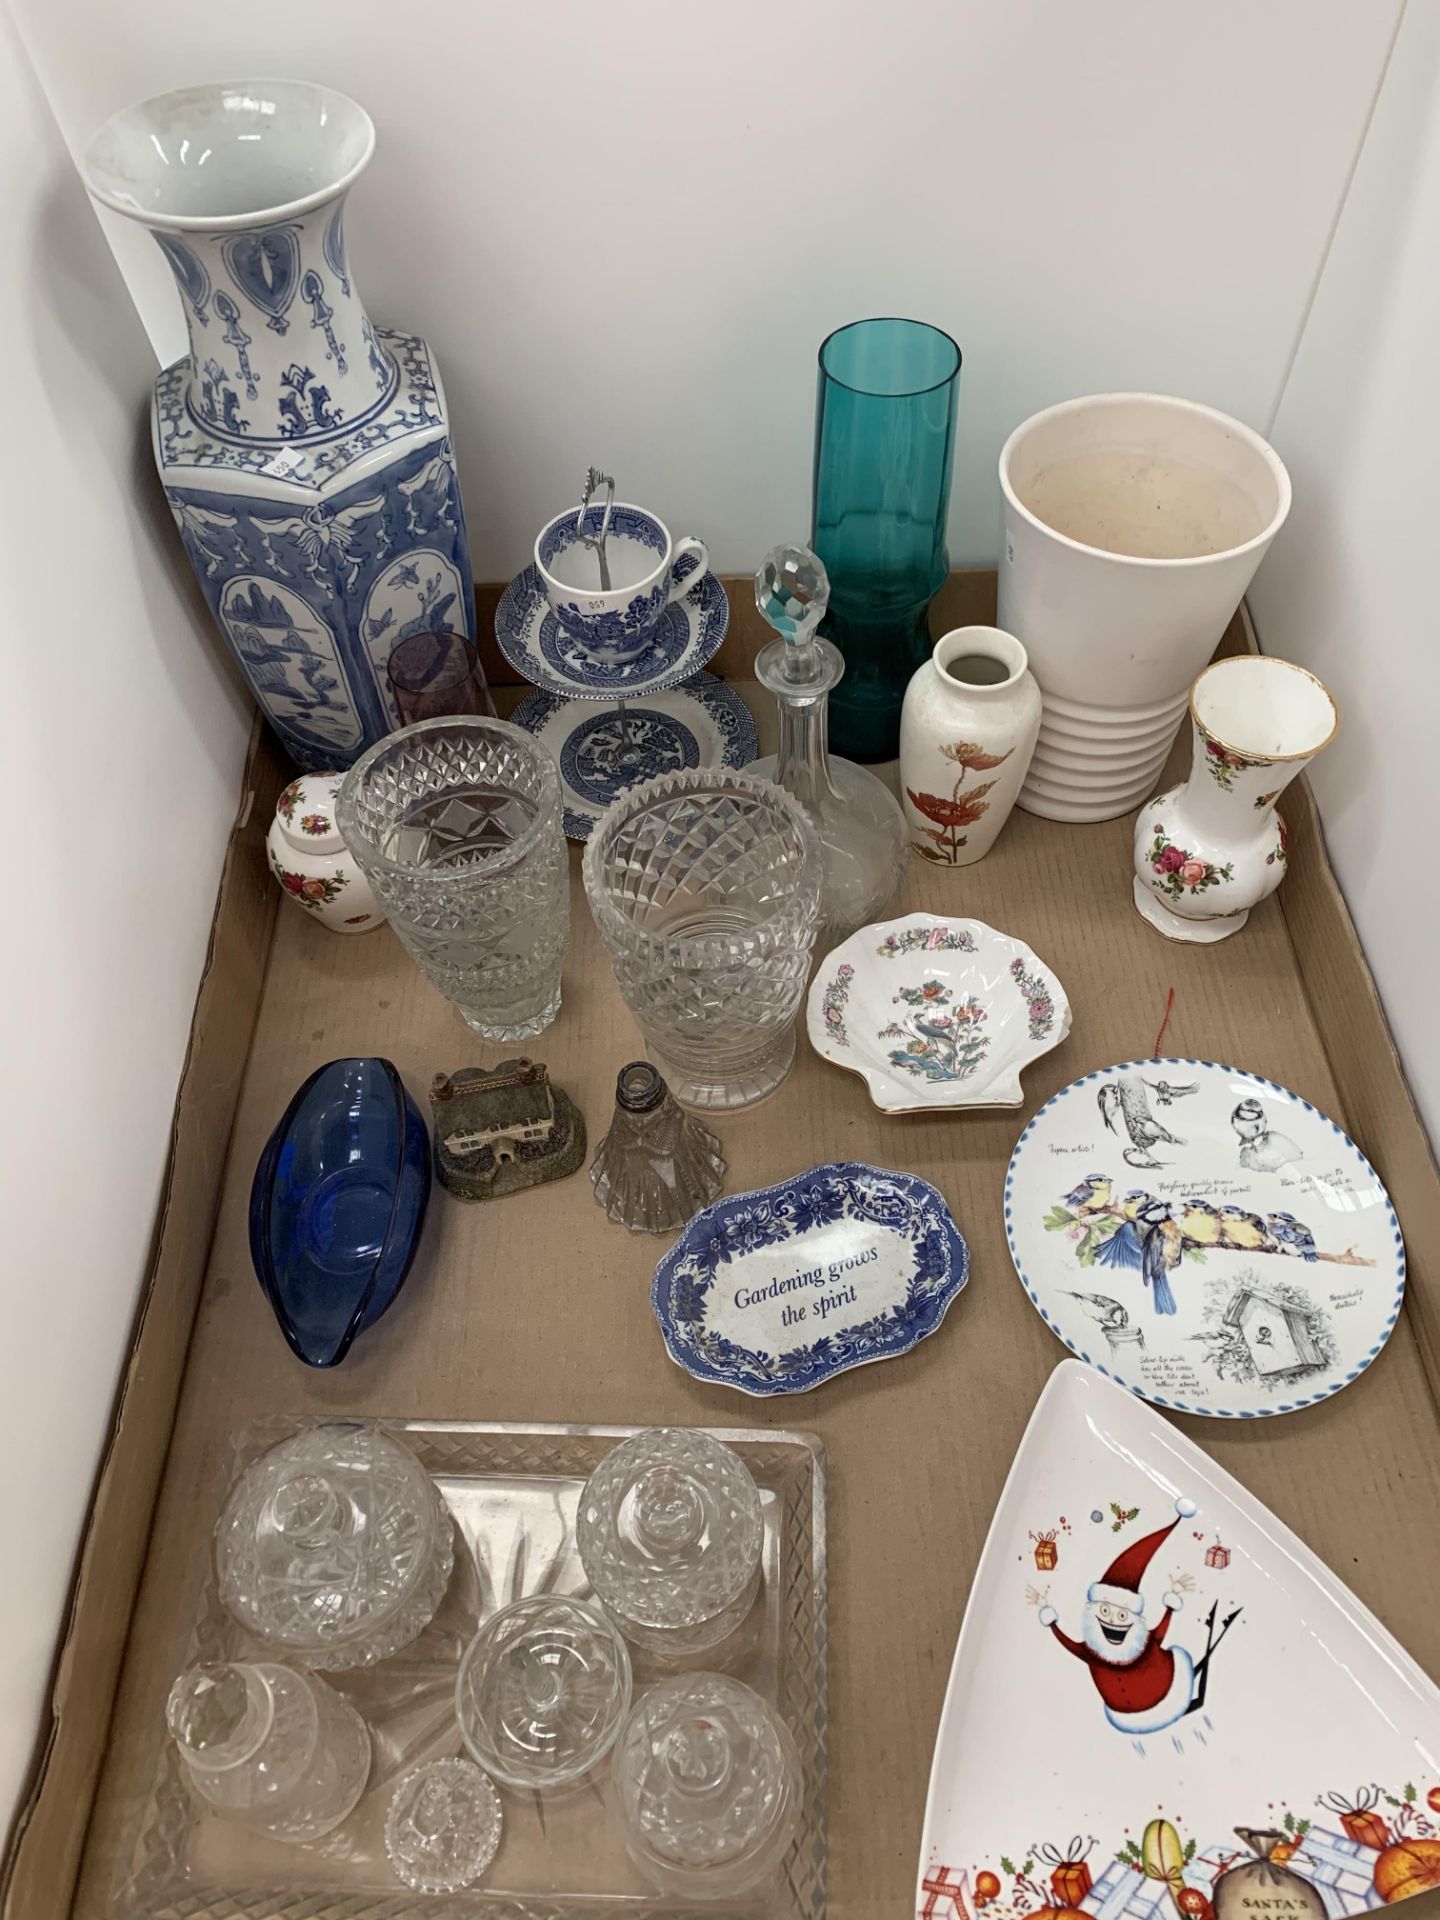 Contents to tray - Wedgwood plate, Spode memento plate, glasses, vases, decanters, - Image 2 of 2